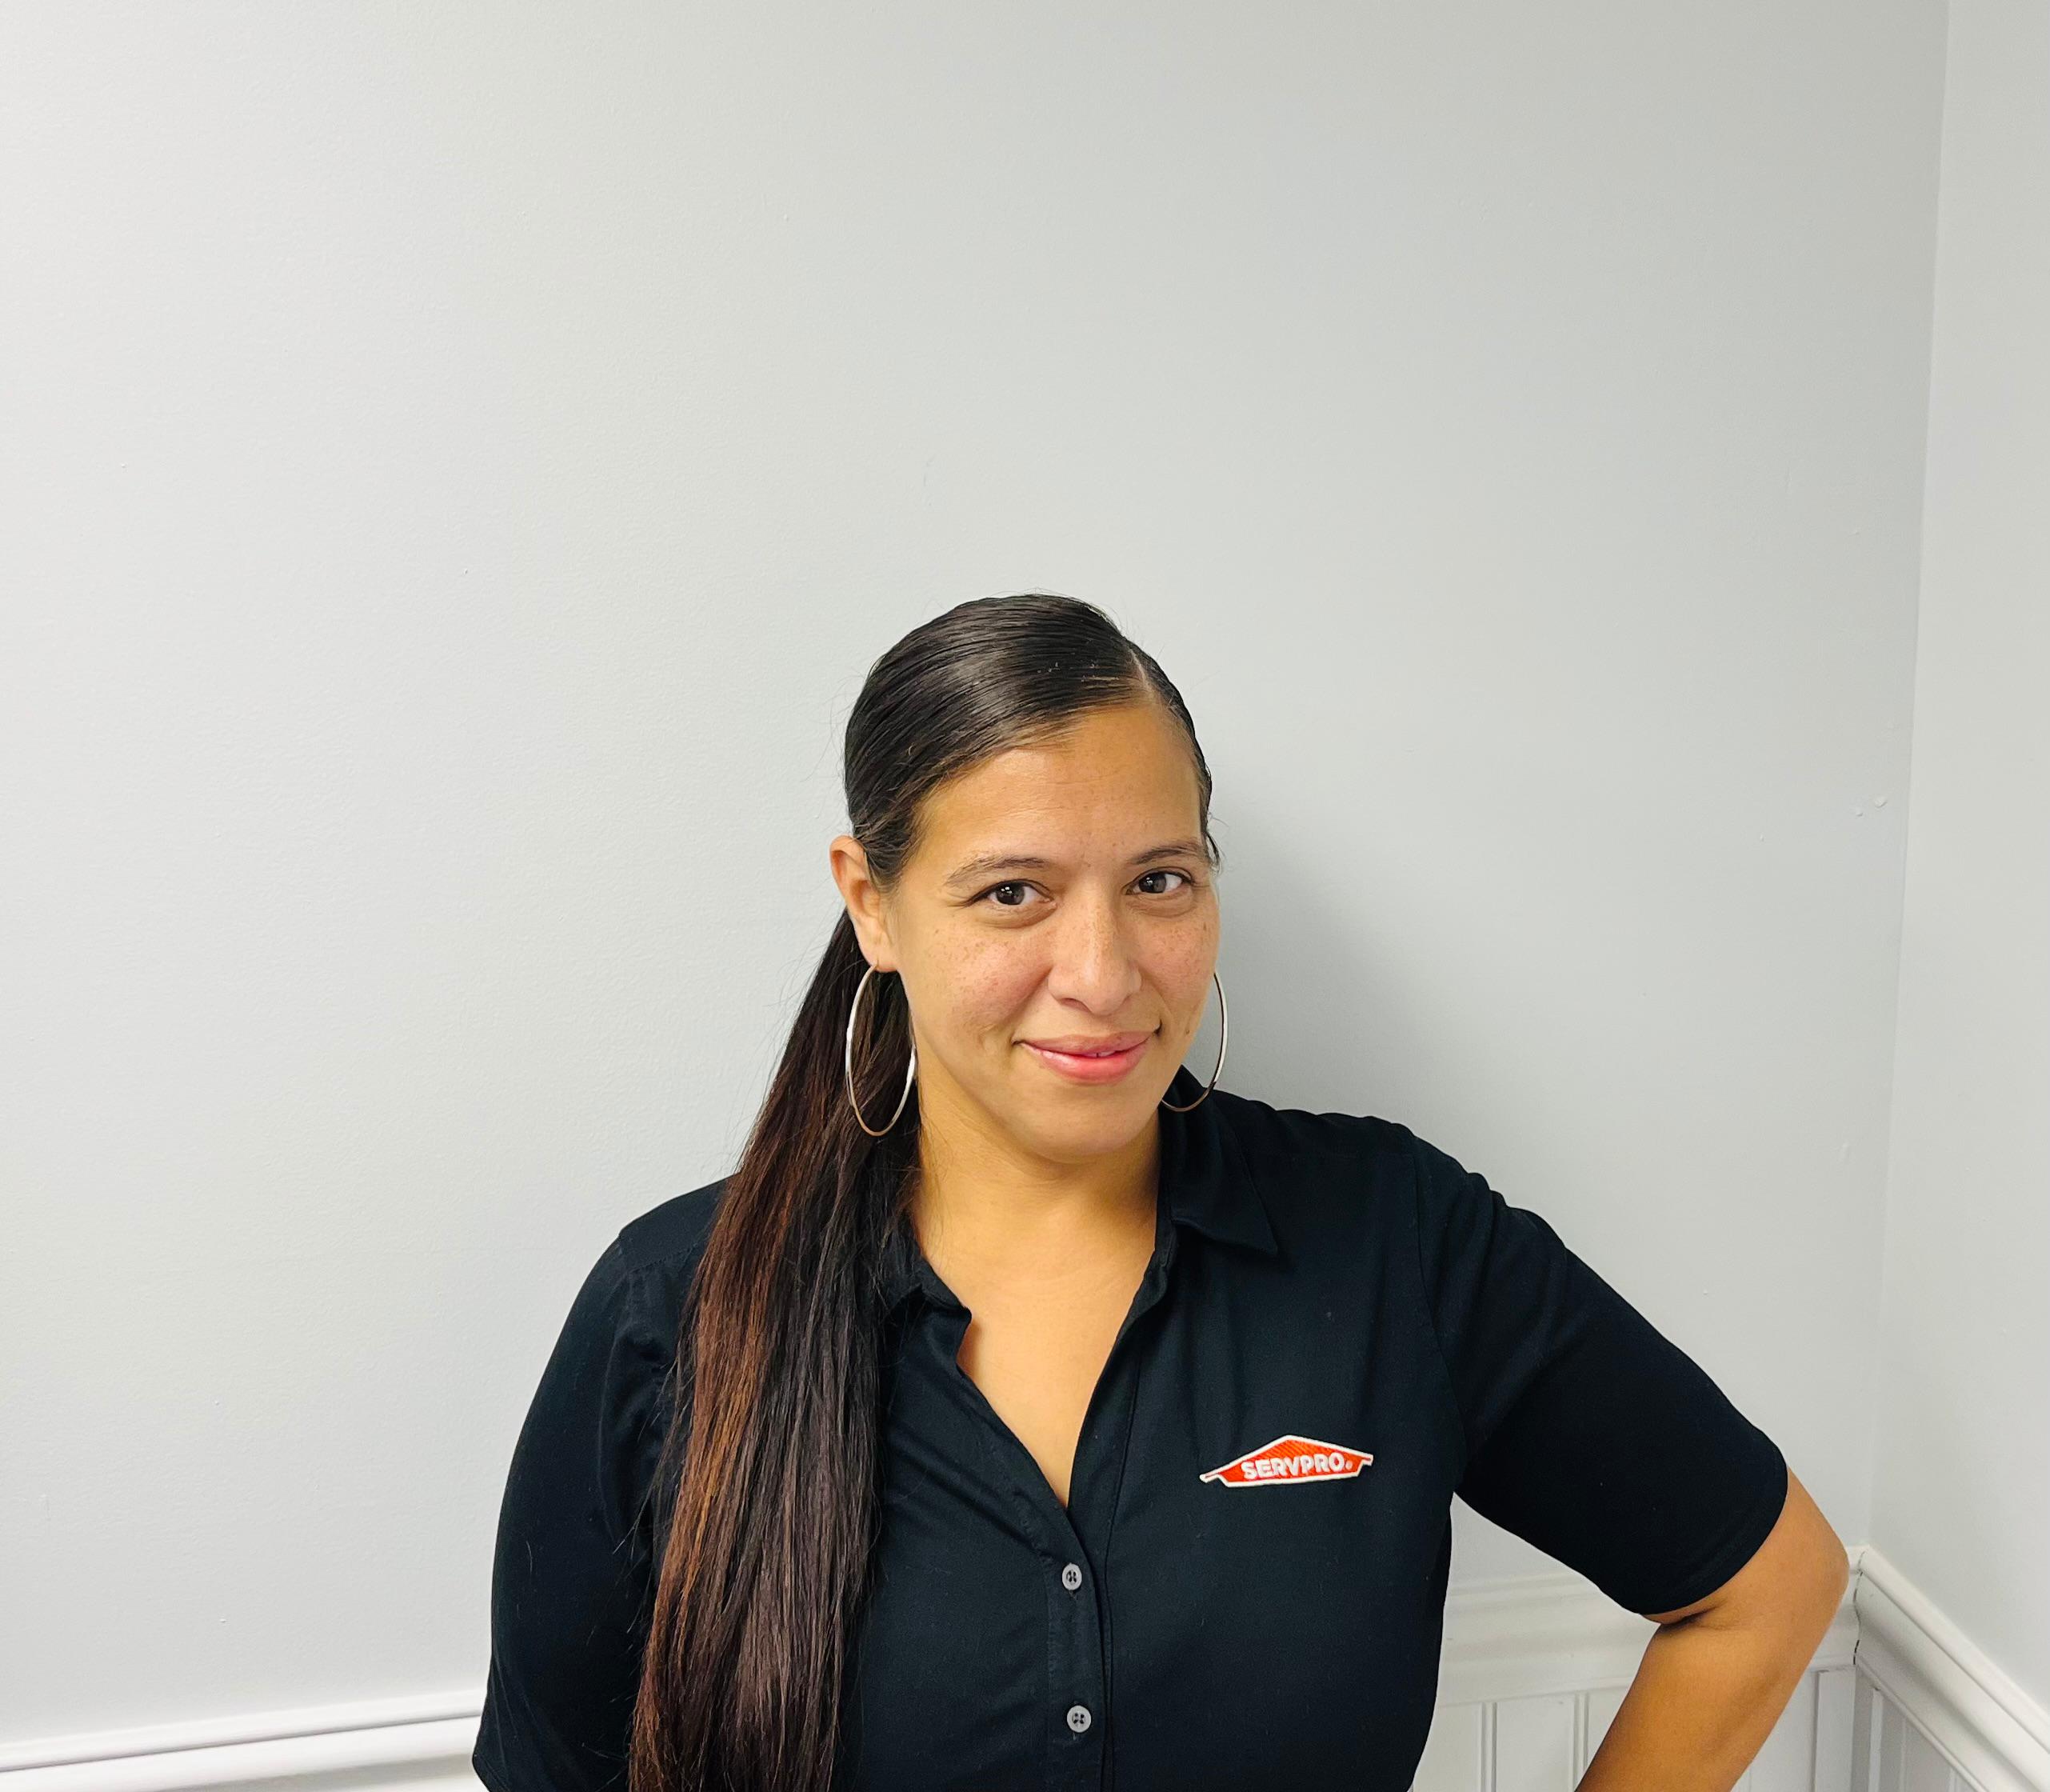 Yvette our Fire, Contents, and Cleaning Manager